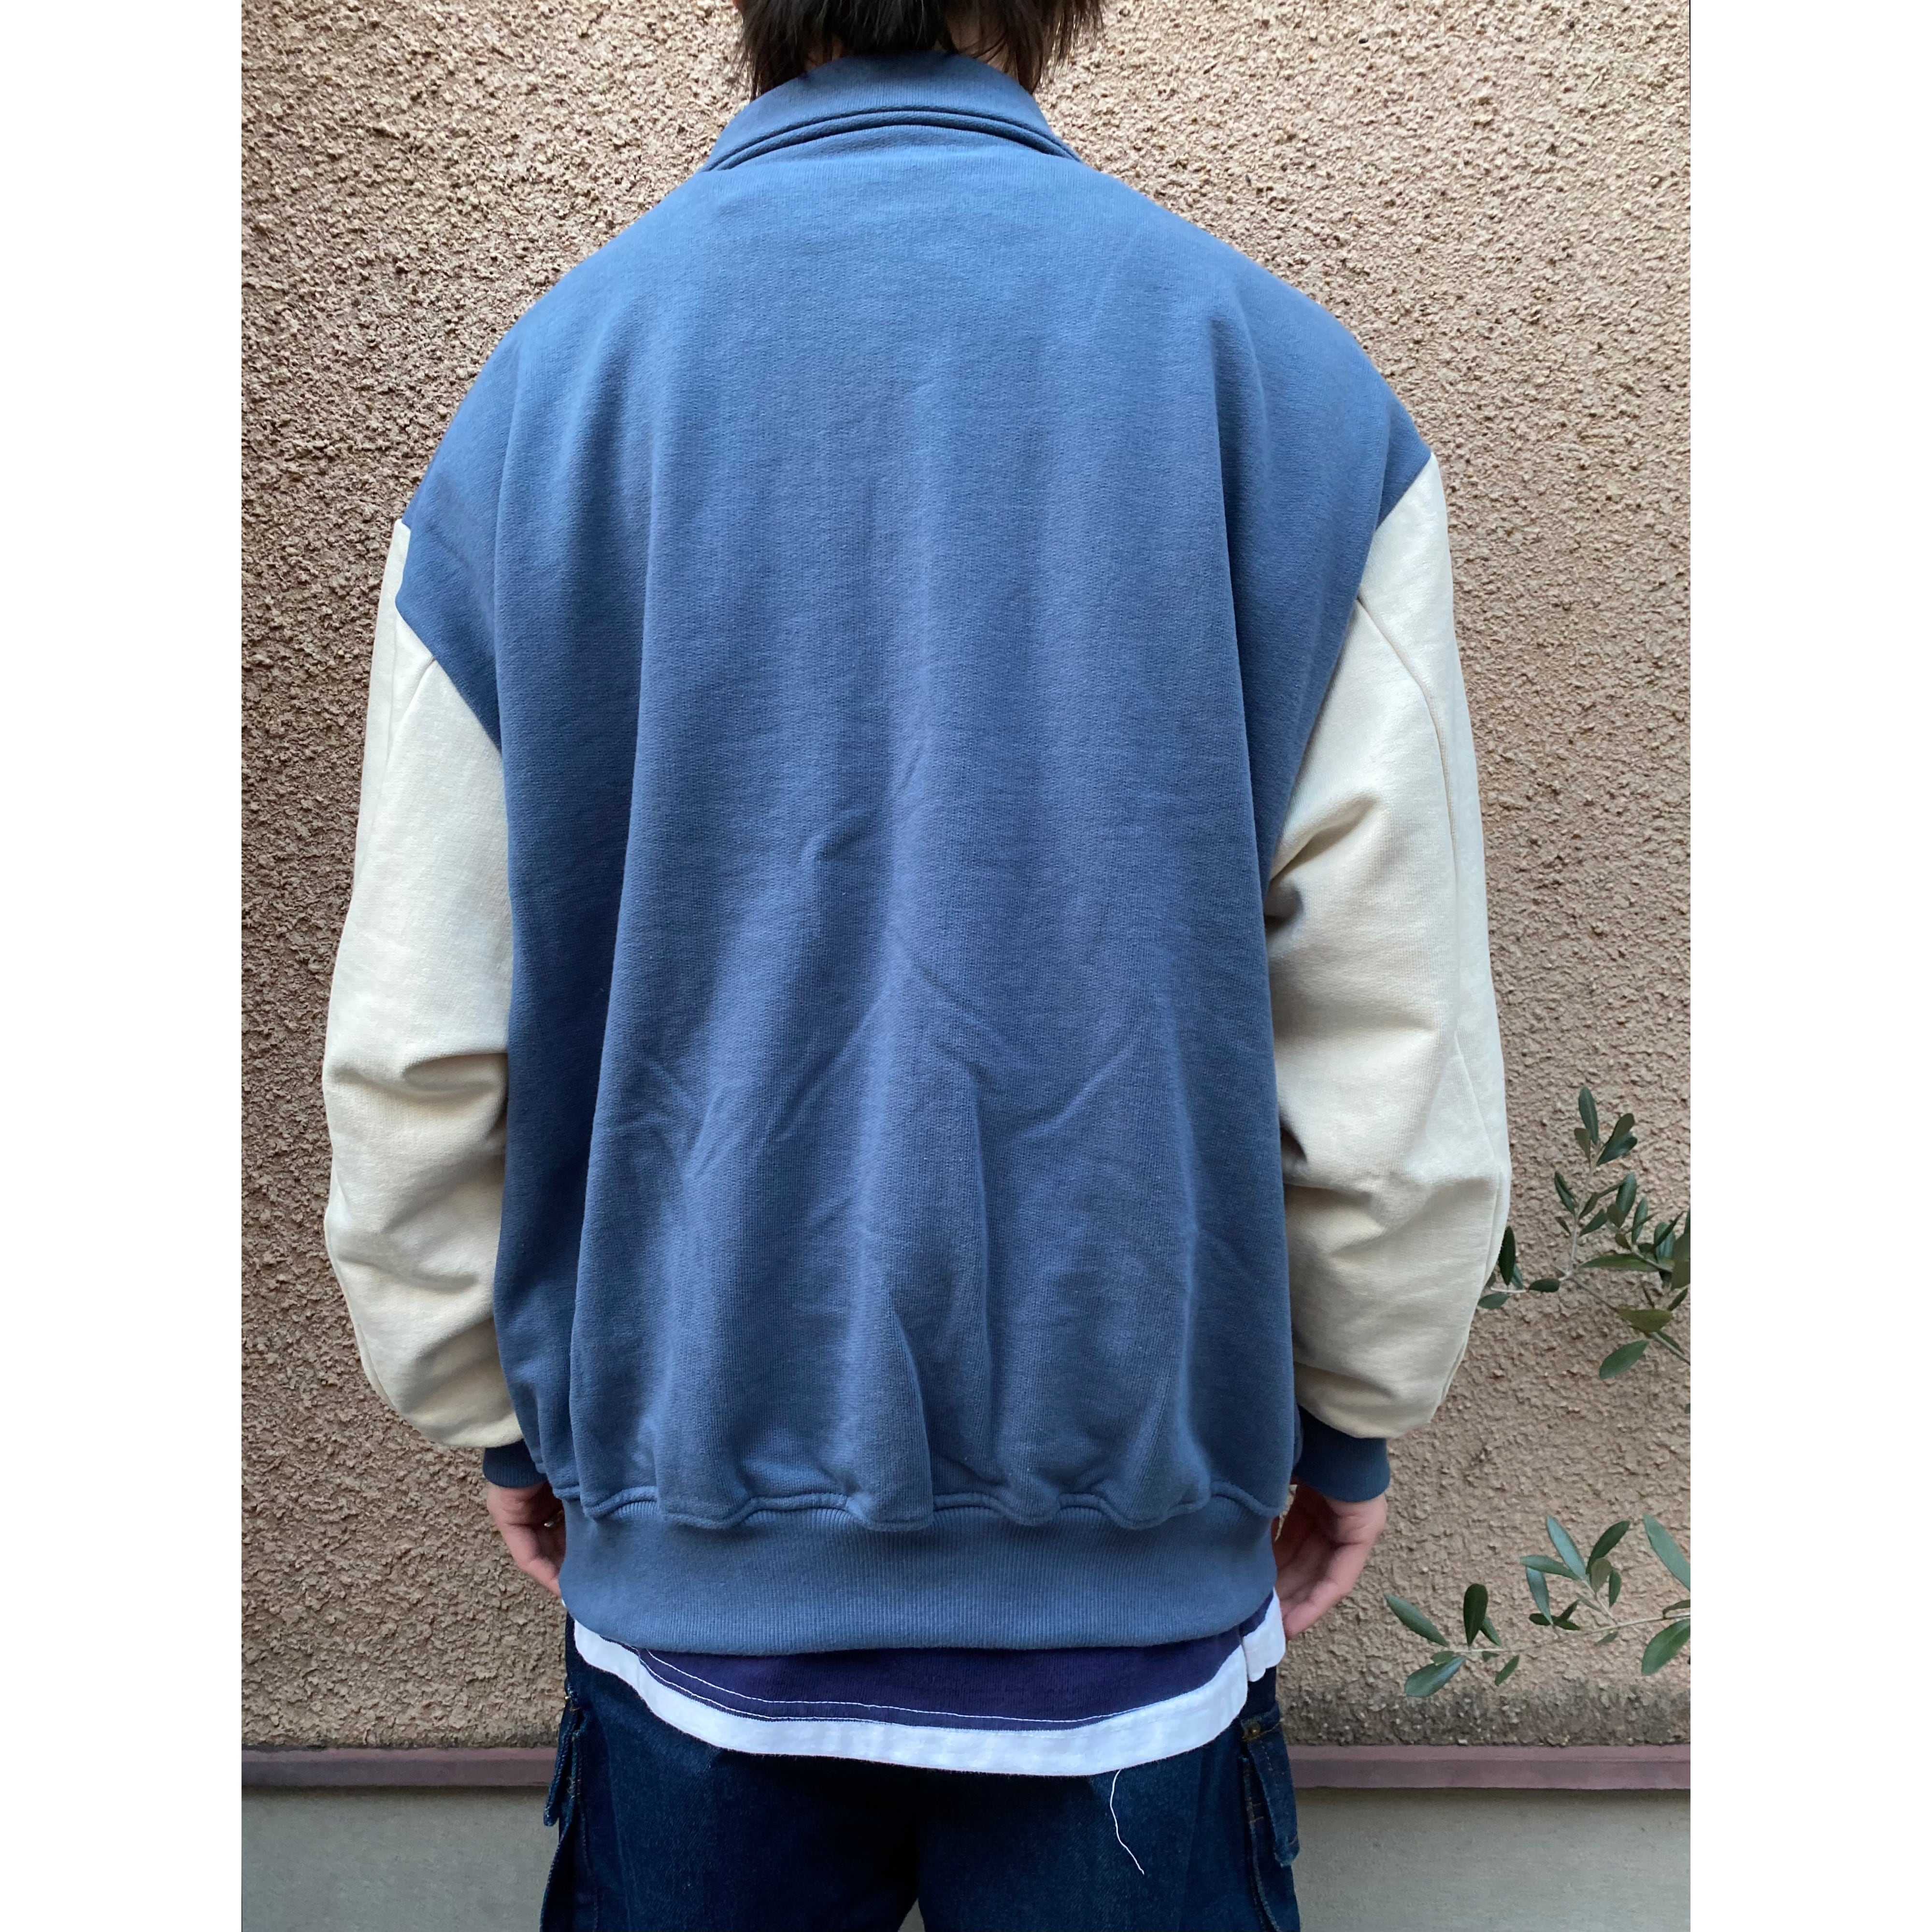 RELAXFIT Soft dry sweat stadium blouson (FADE NAVY×POTAGE) | HEIGHTS Online  Store powered by BASE